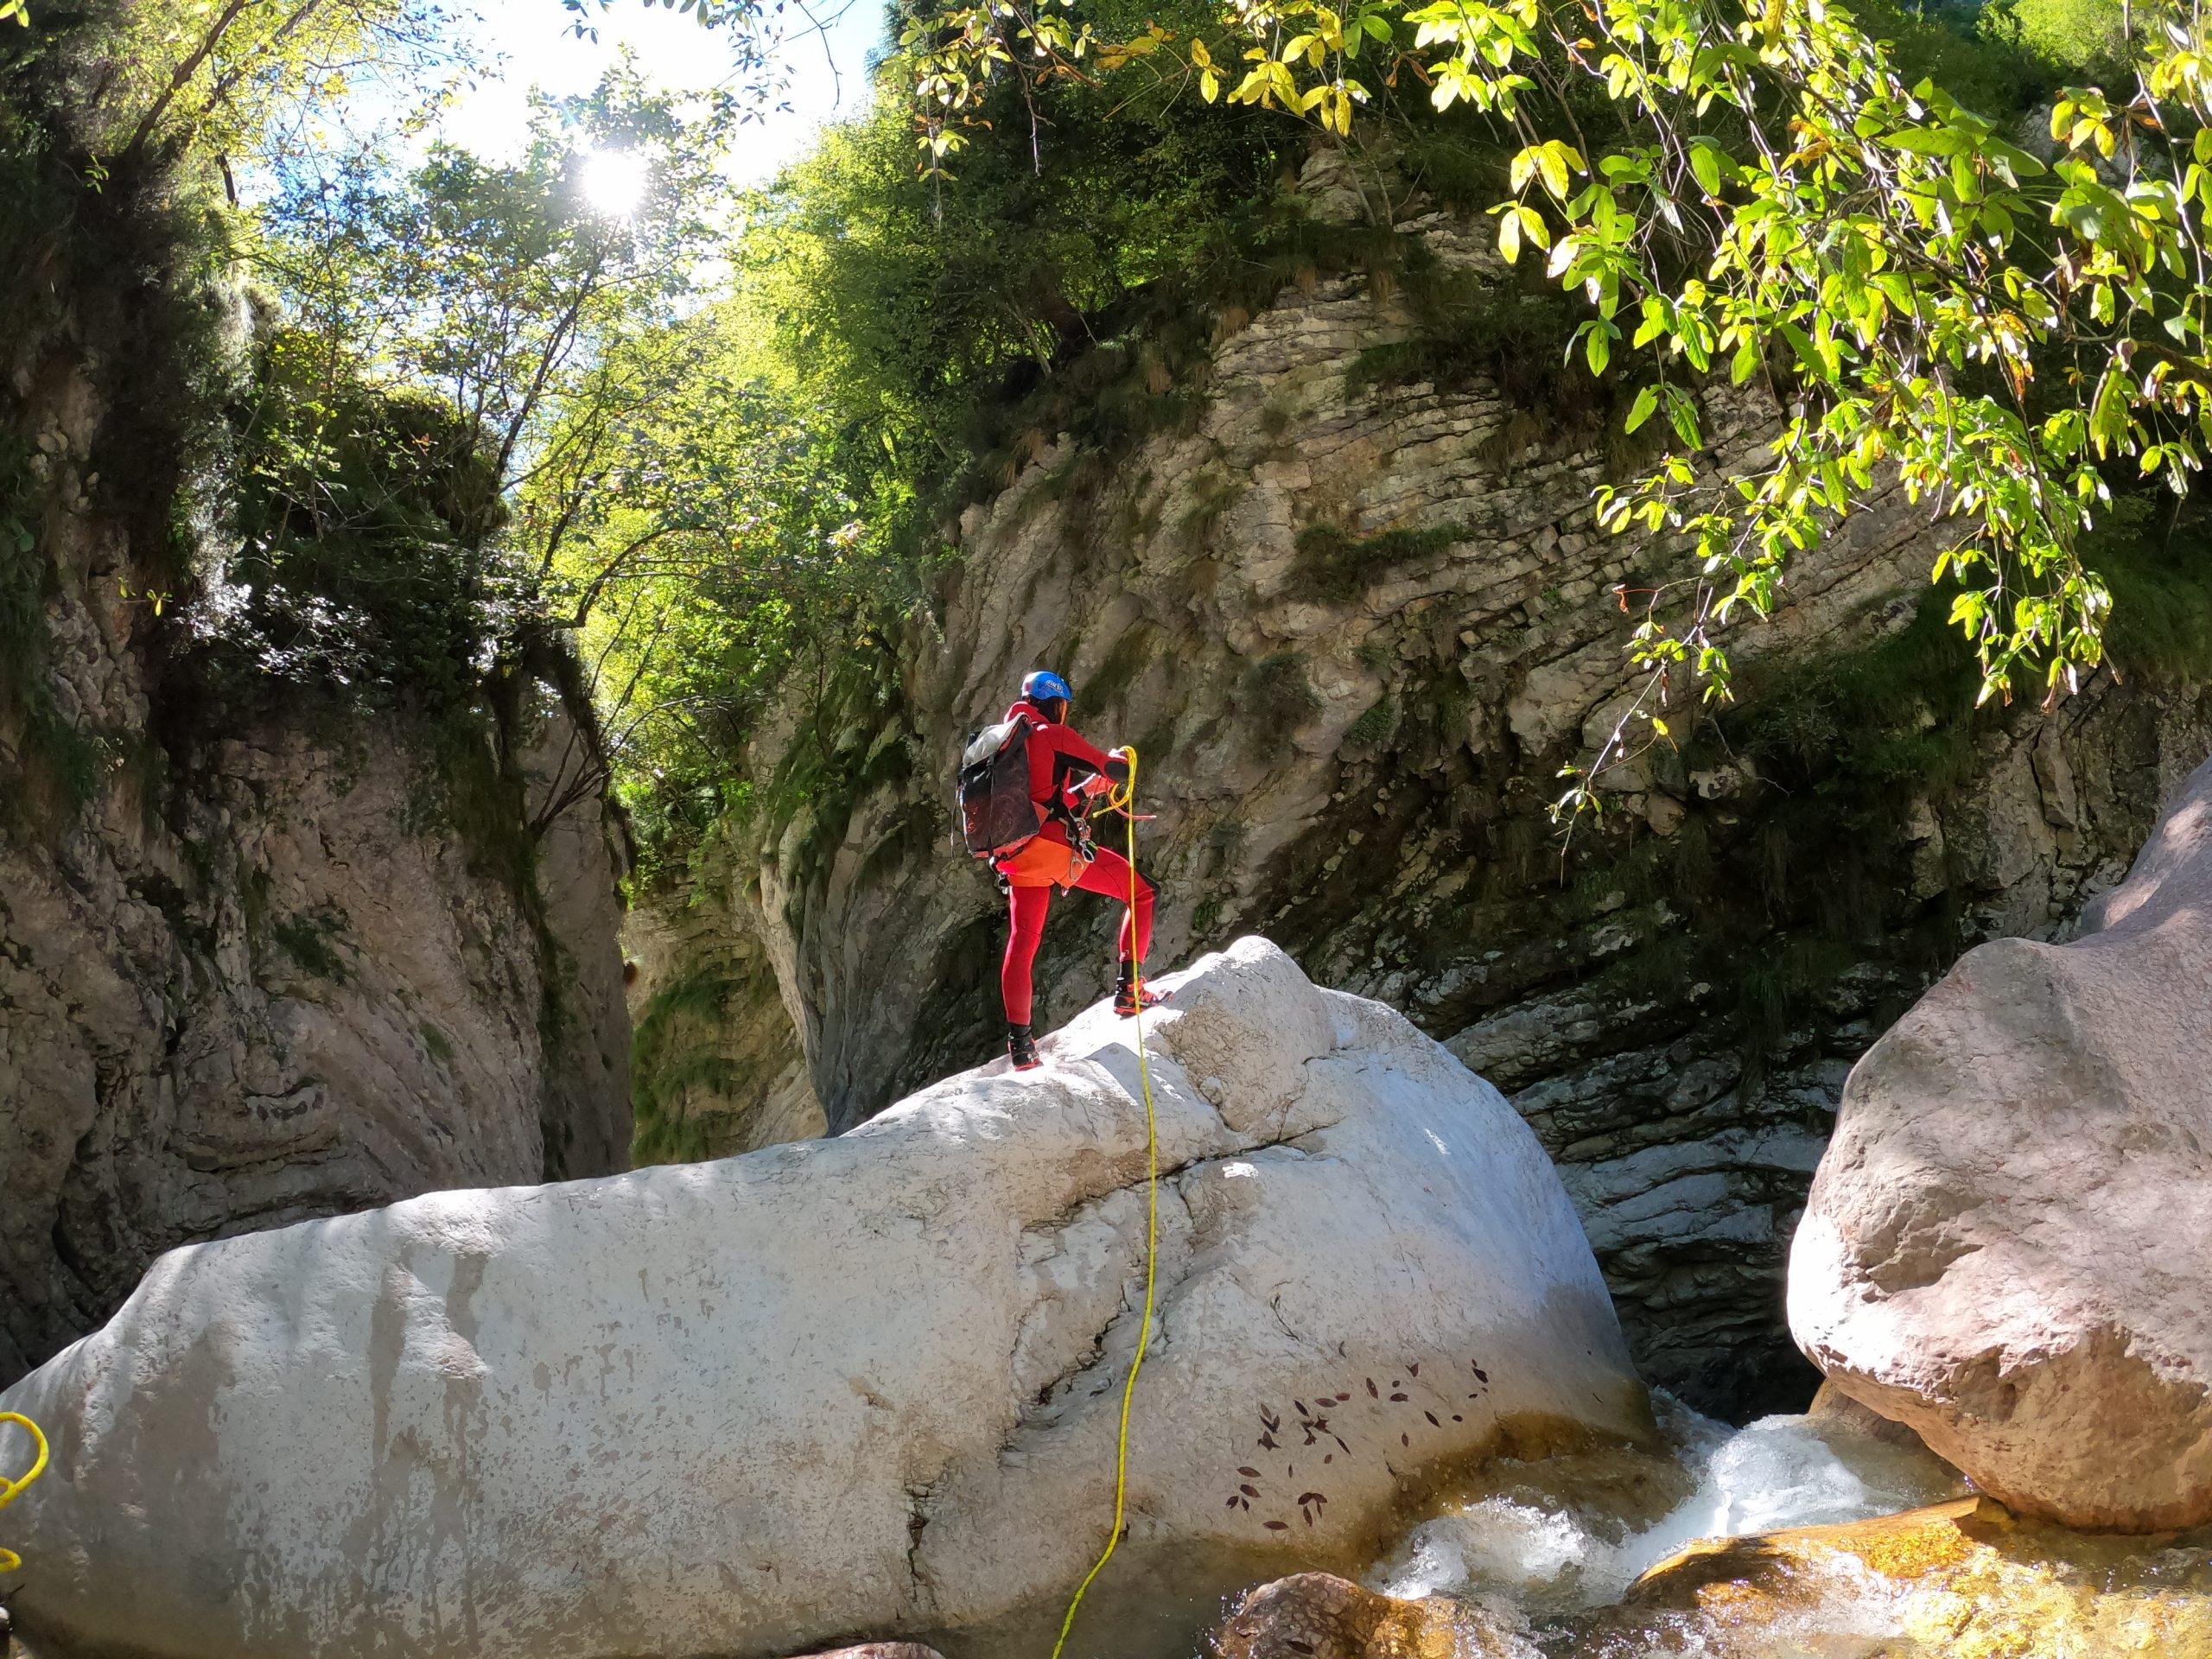 Luxury outdoor adventure canyoning in Slovenia